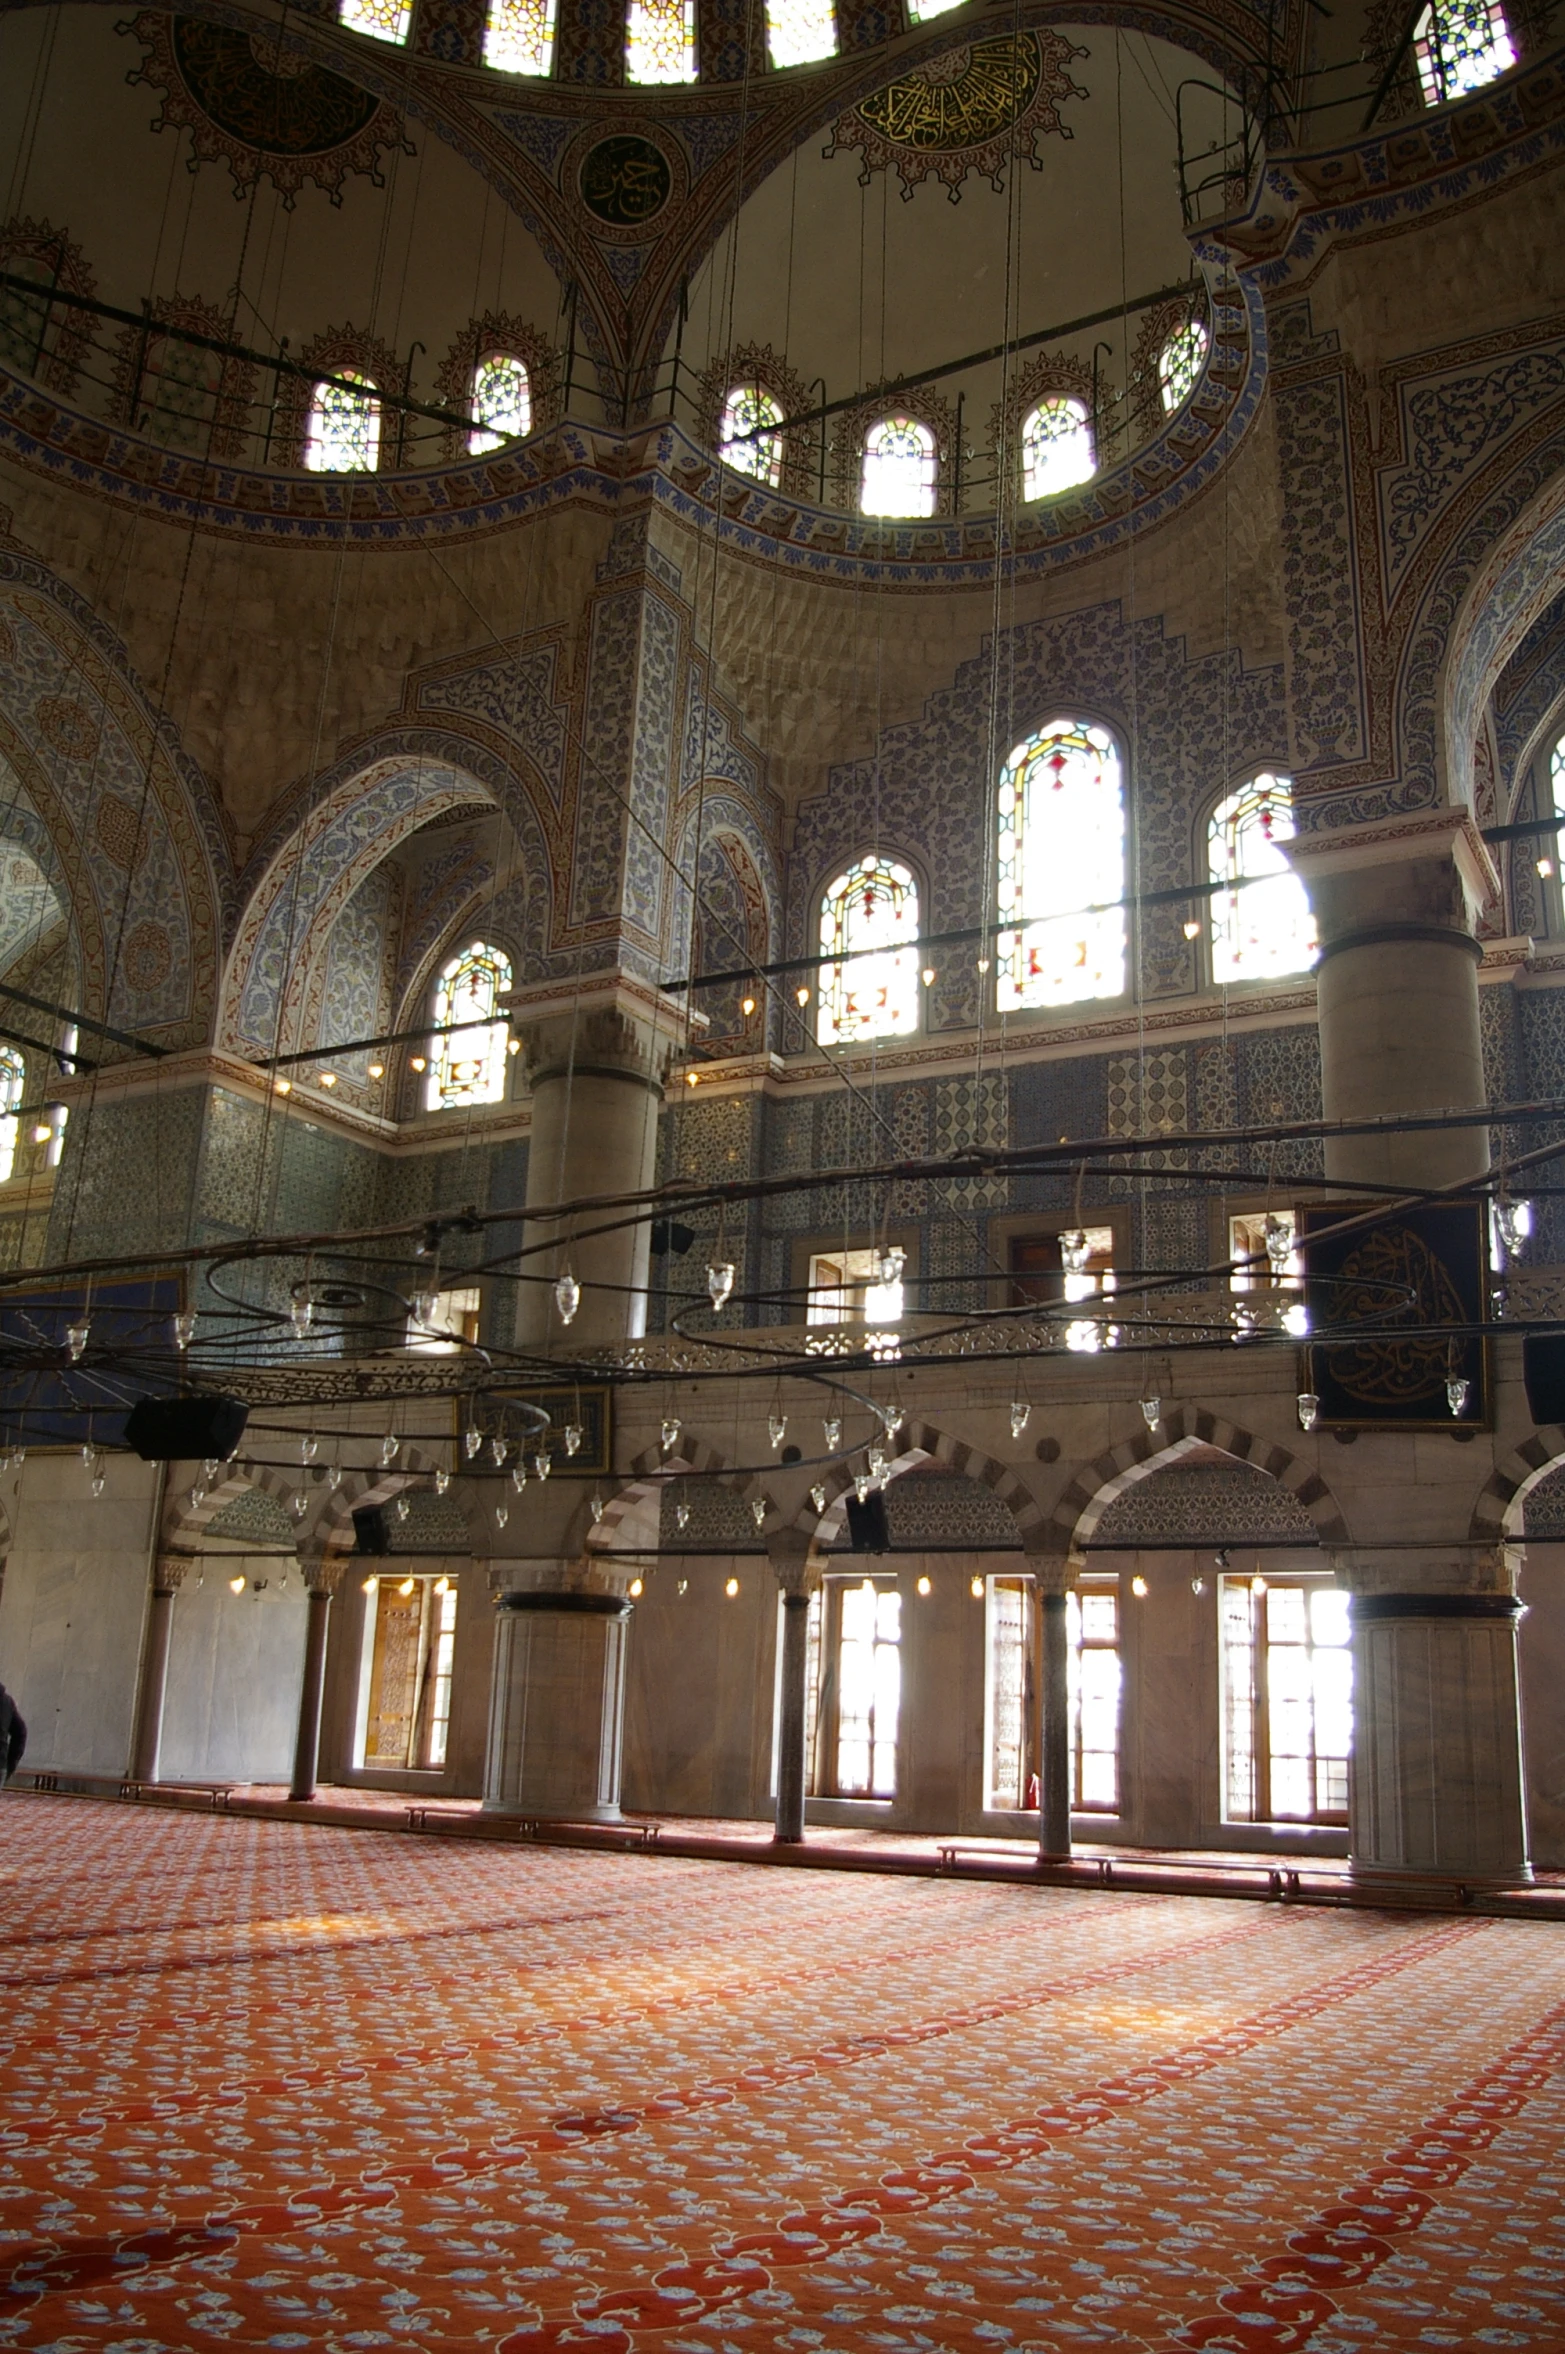 the inside of a large building with windows and ornate decorations